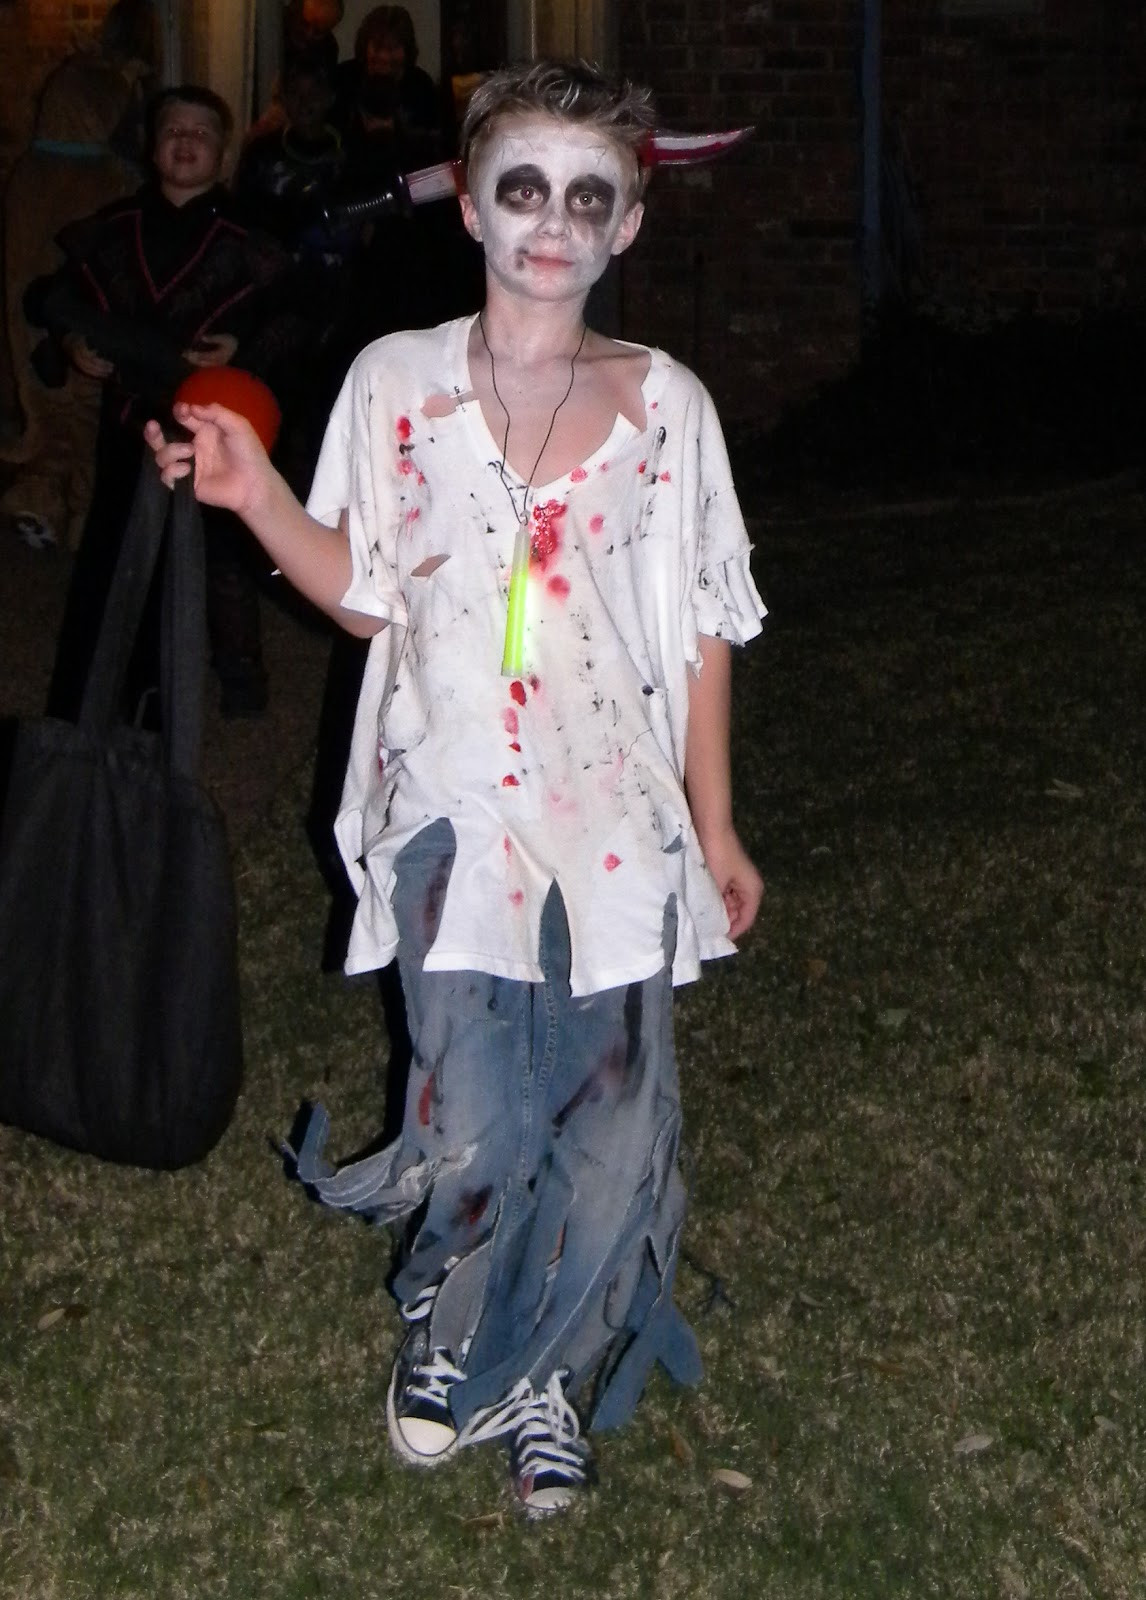 Cheap Halloween Costume Ideas
 To Life and To Love 15 Cheap & Easy Homemade Halloween